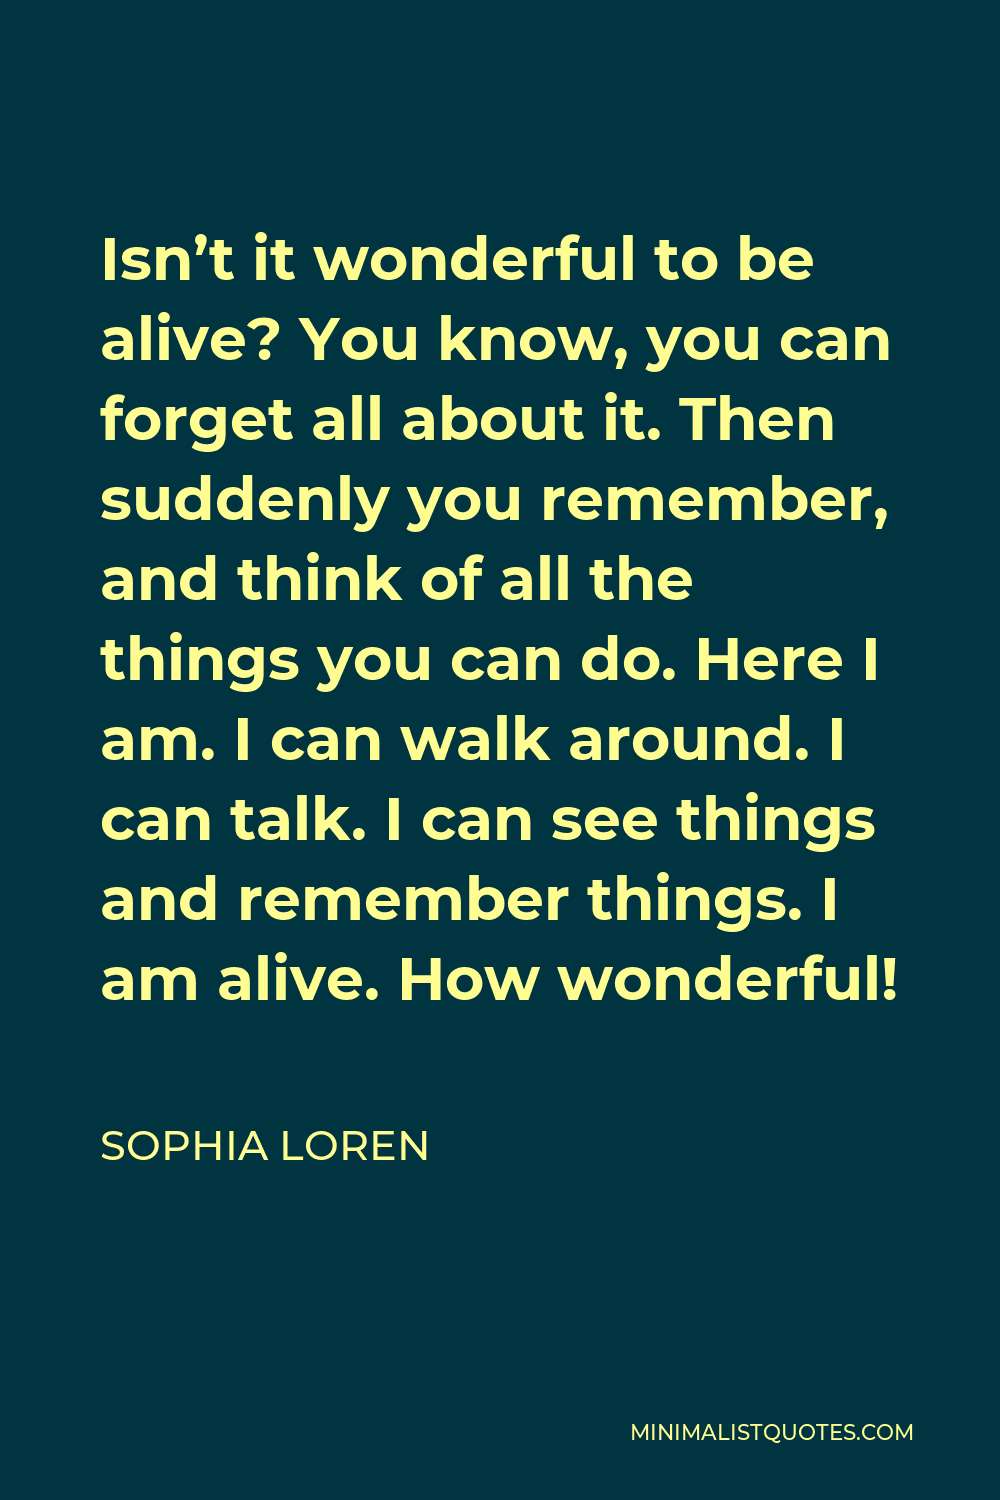 Sophia Loren Quote - Isn’t it wonderful to be alive? You know, you can forget all about it. Then suddenly you remember, and think of all the things you can do. Here I am. I can walk around. I can talk. I can see things and remember things. I am alive. How wonderful!